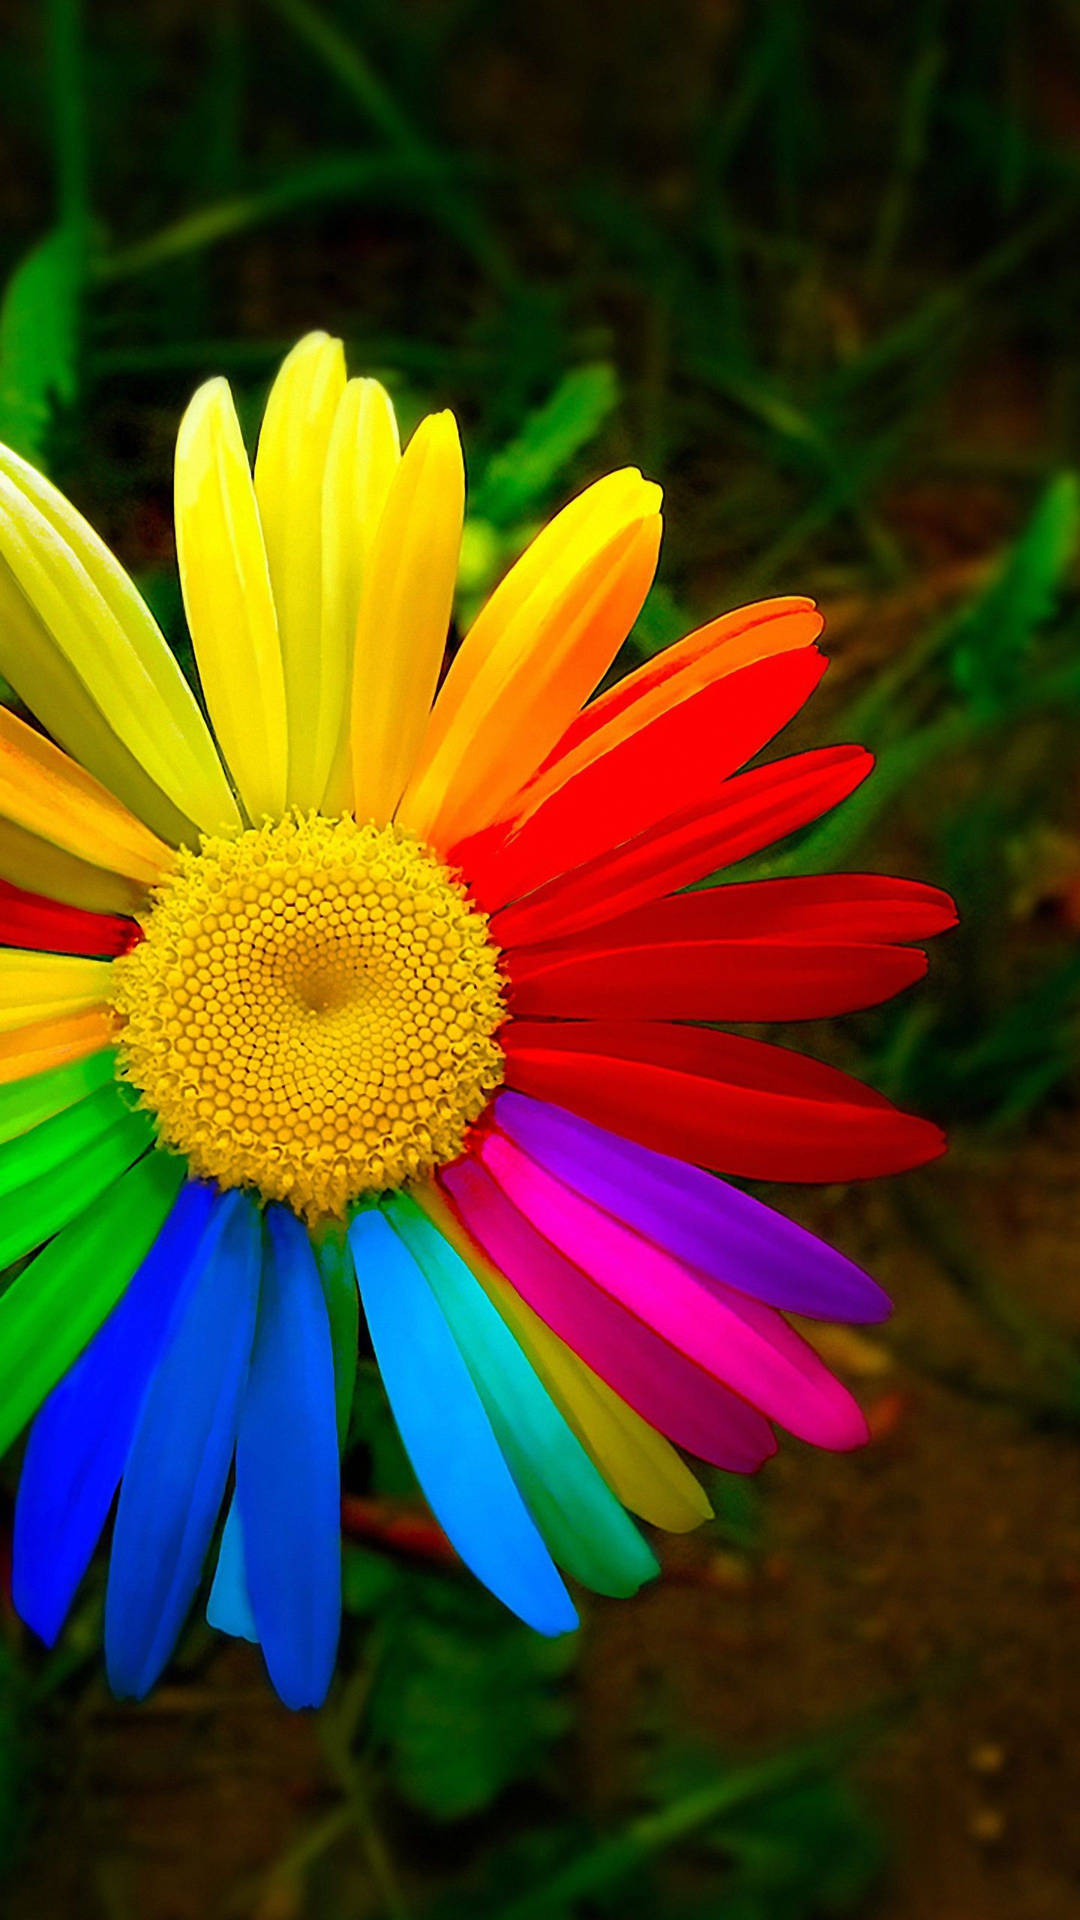 Bright and colorful daisy flower HD wallpaper.